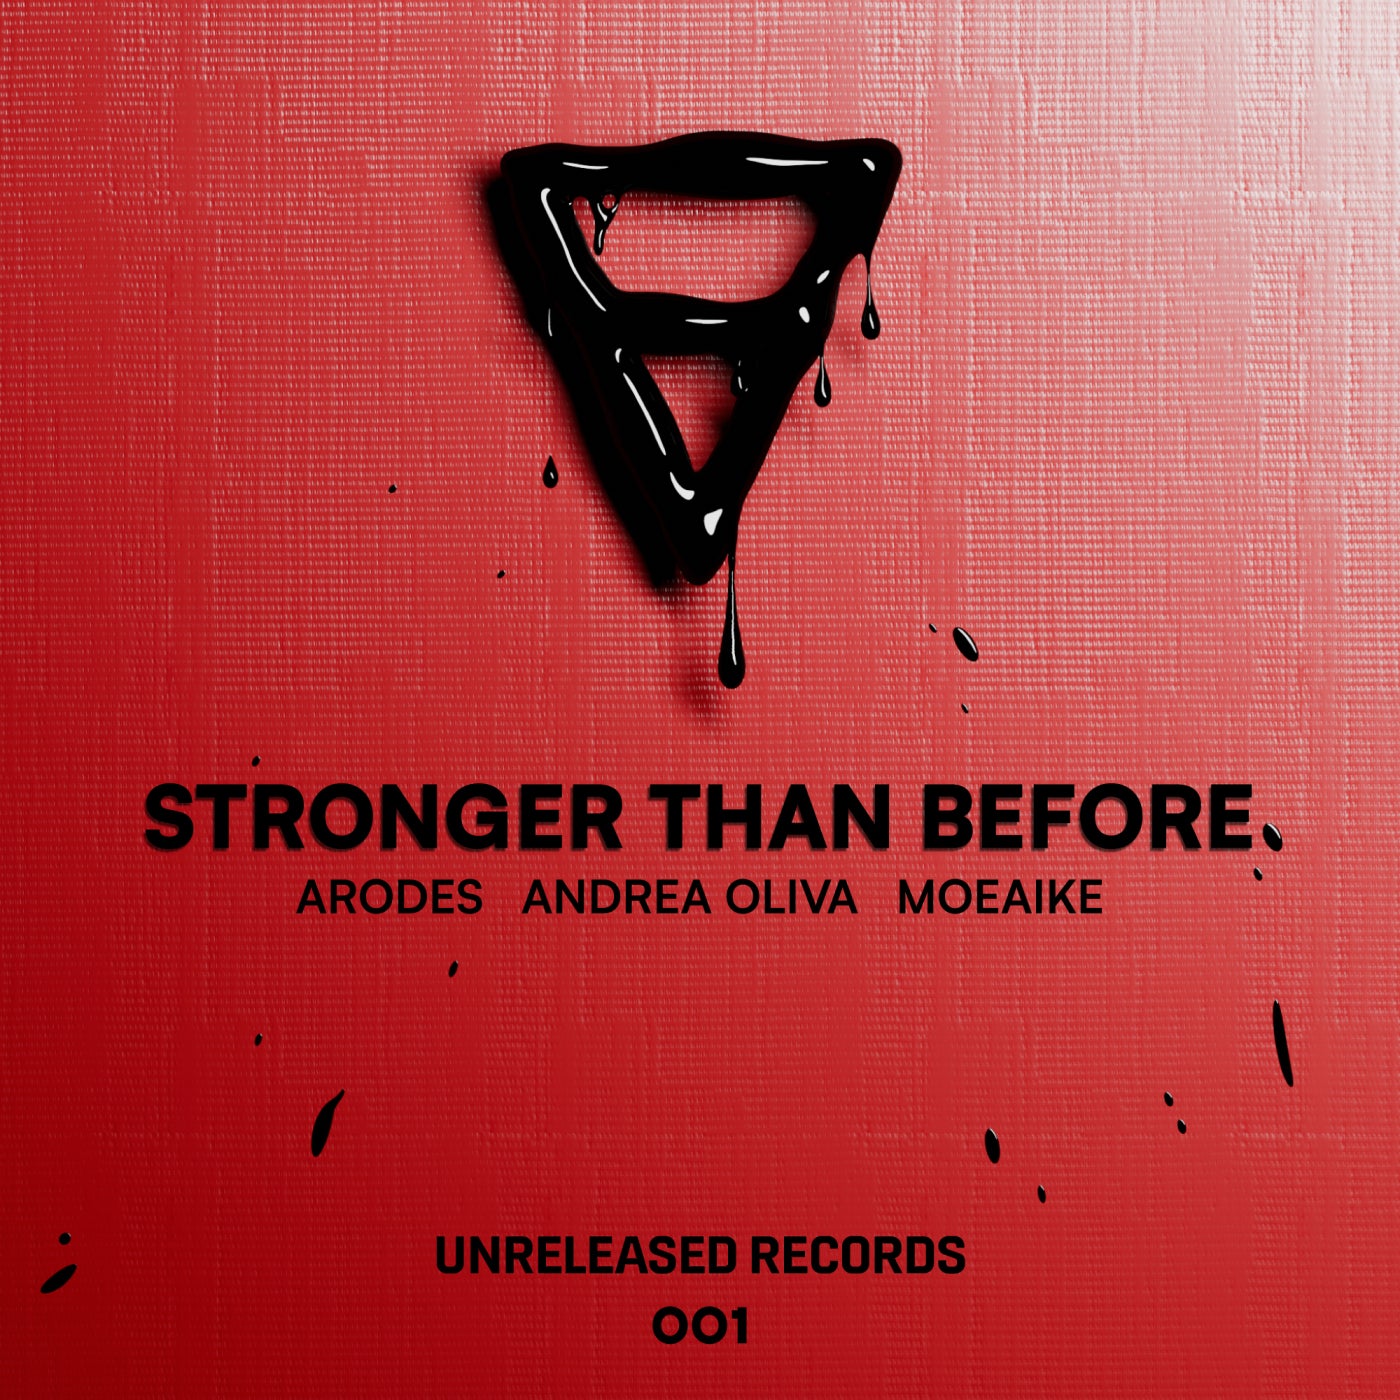 image cover: Andrea Oliva, Moeaike, Arodes - Stronger Than Before on Unreleased Records